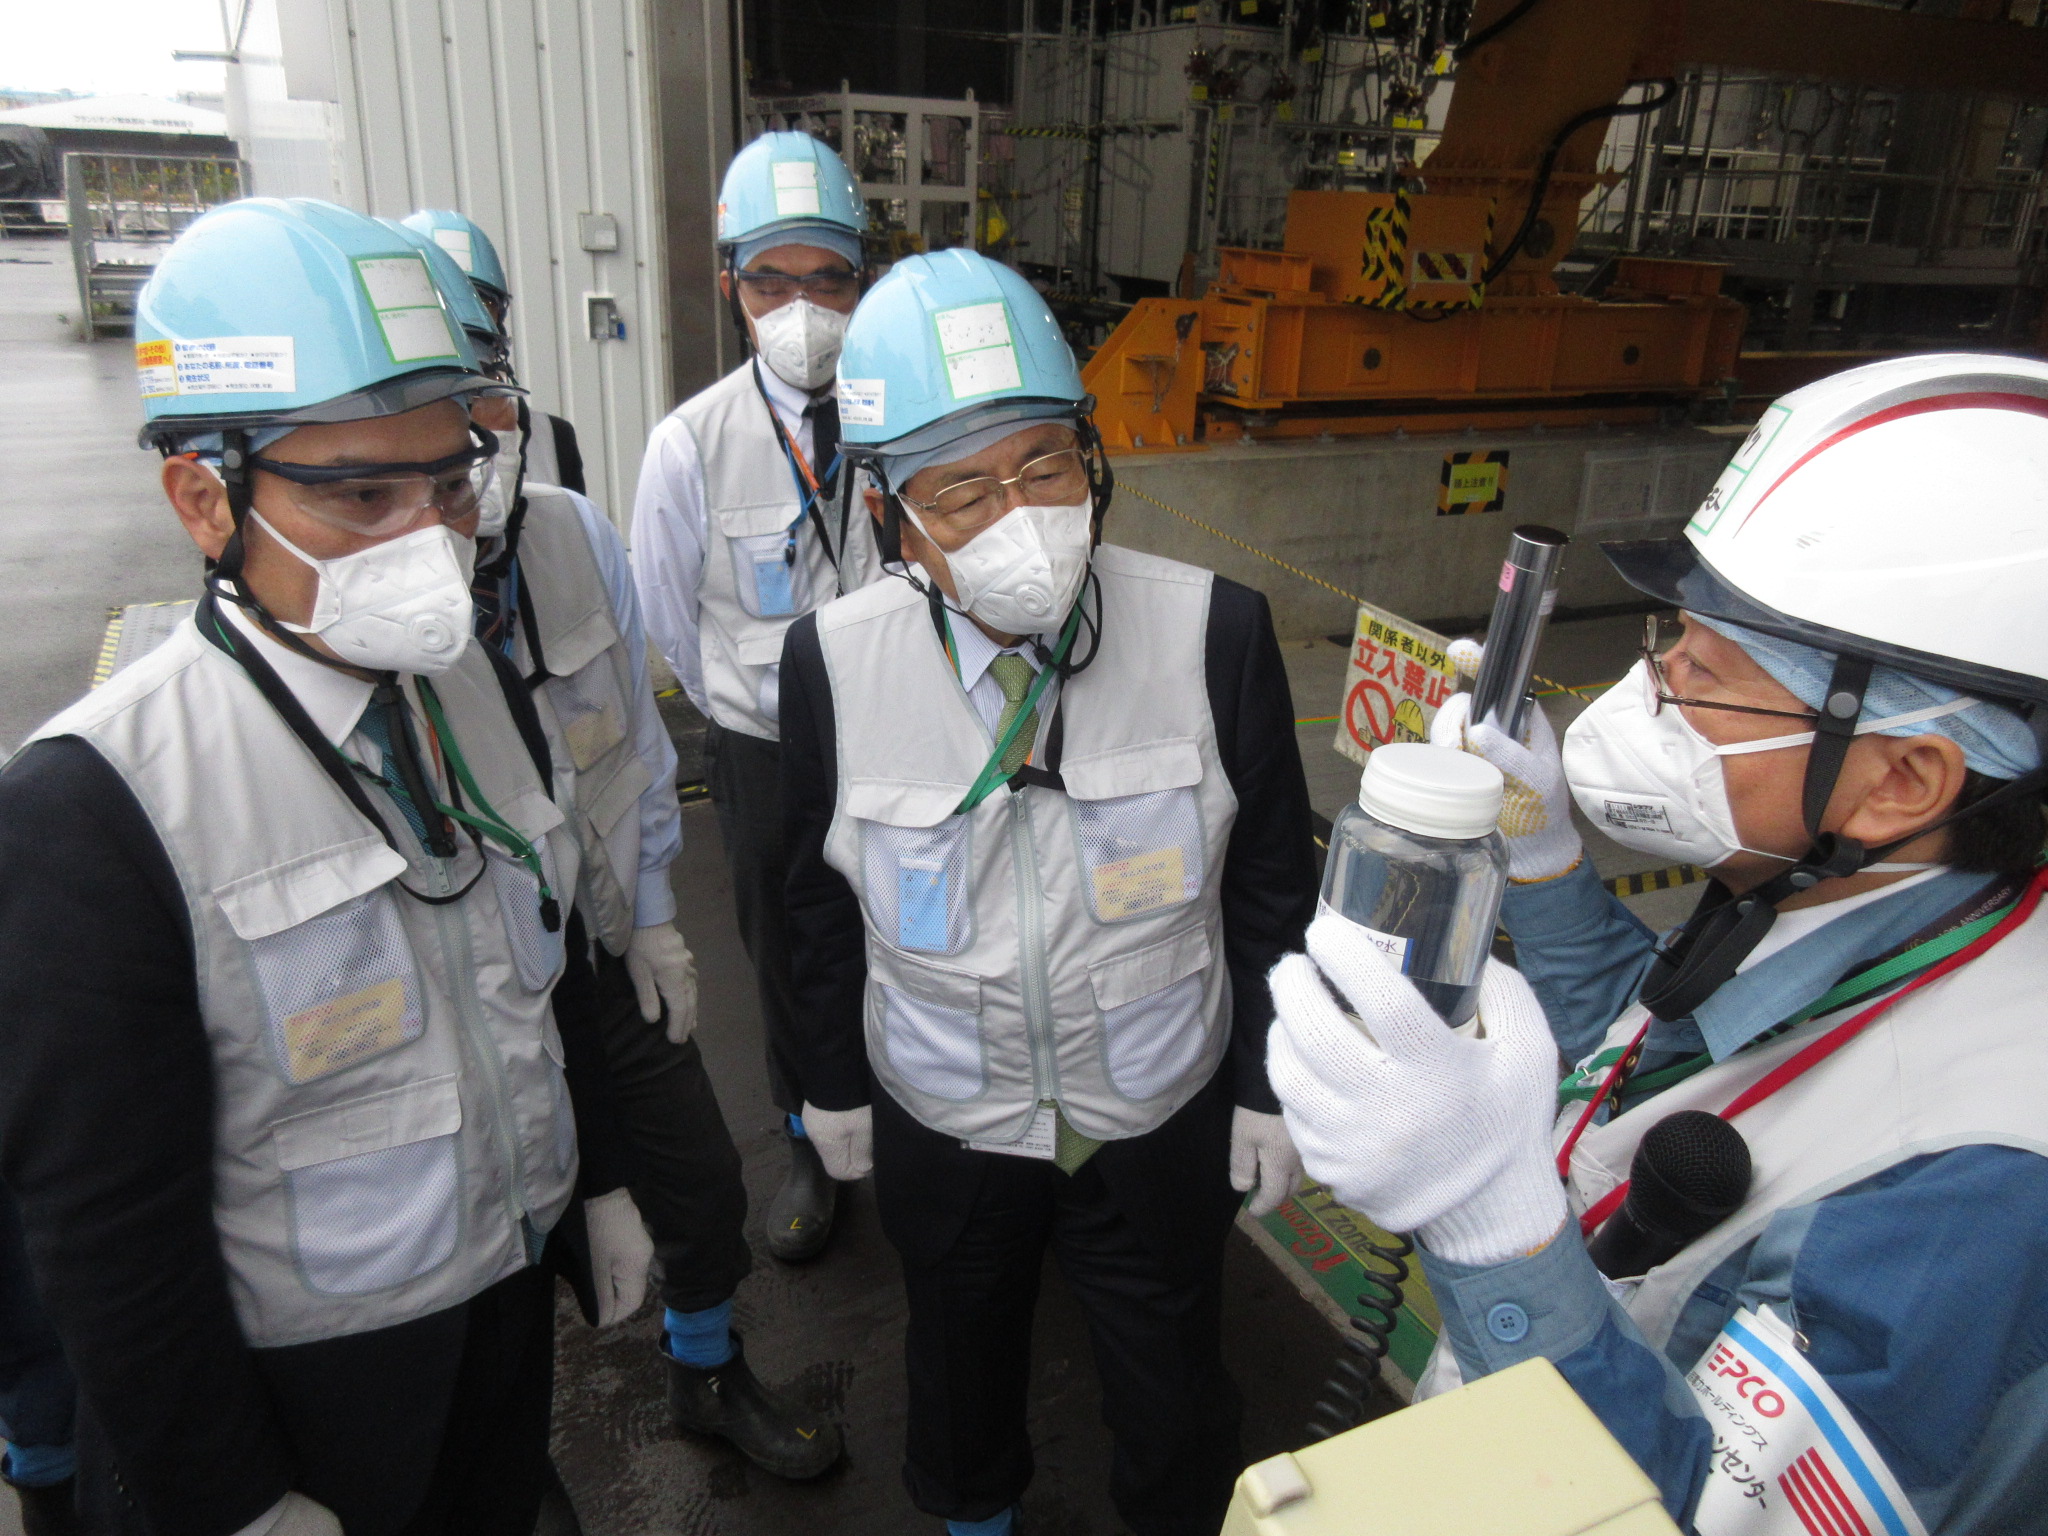 State Minister of Economy, Trade and Industry, Masahiro Ishii’s visit to the Fukushima Daiichi Nuclear Power Station (October 16, 2021)